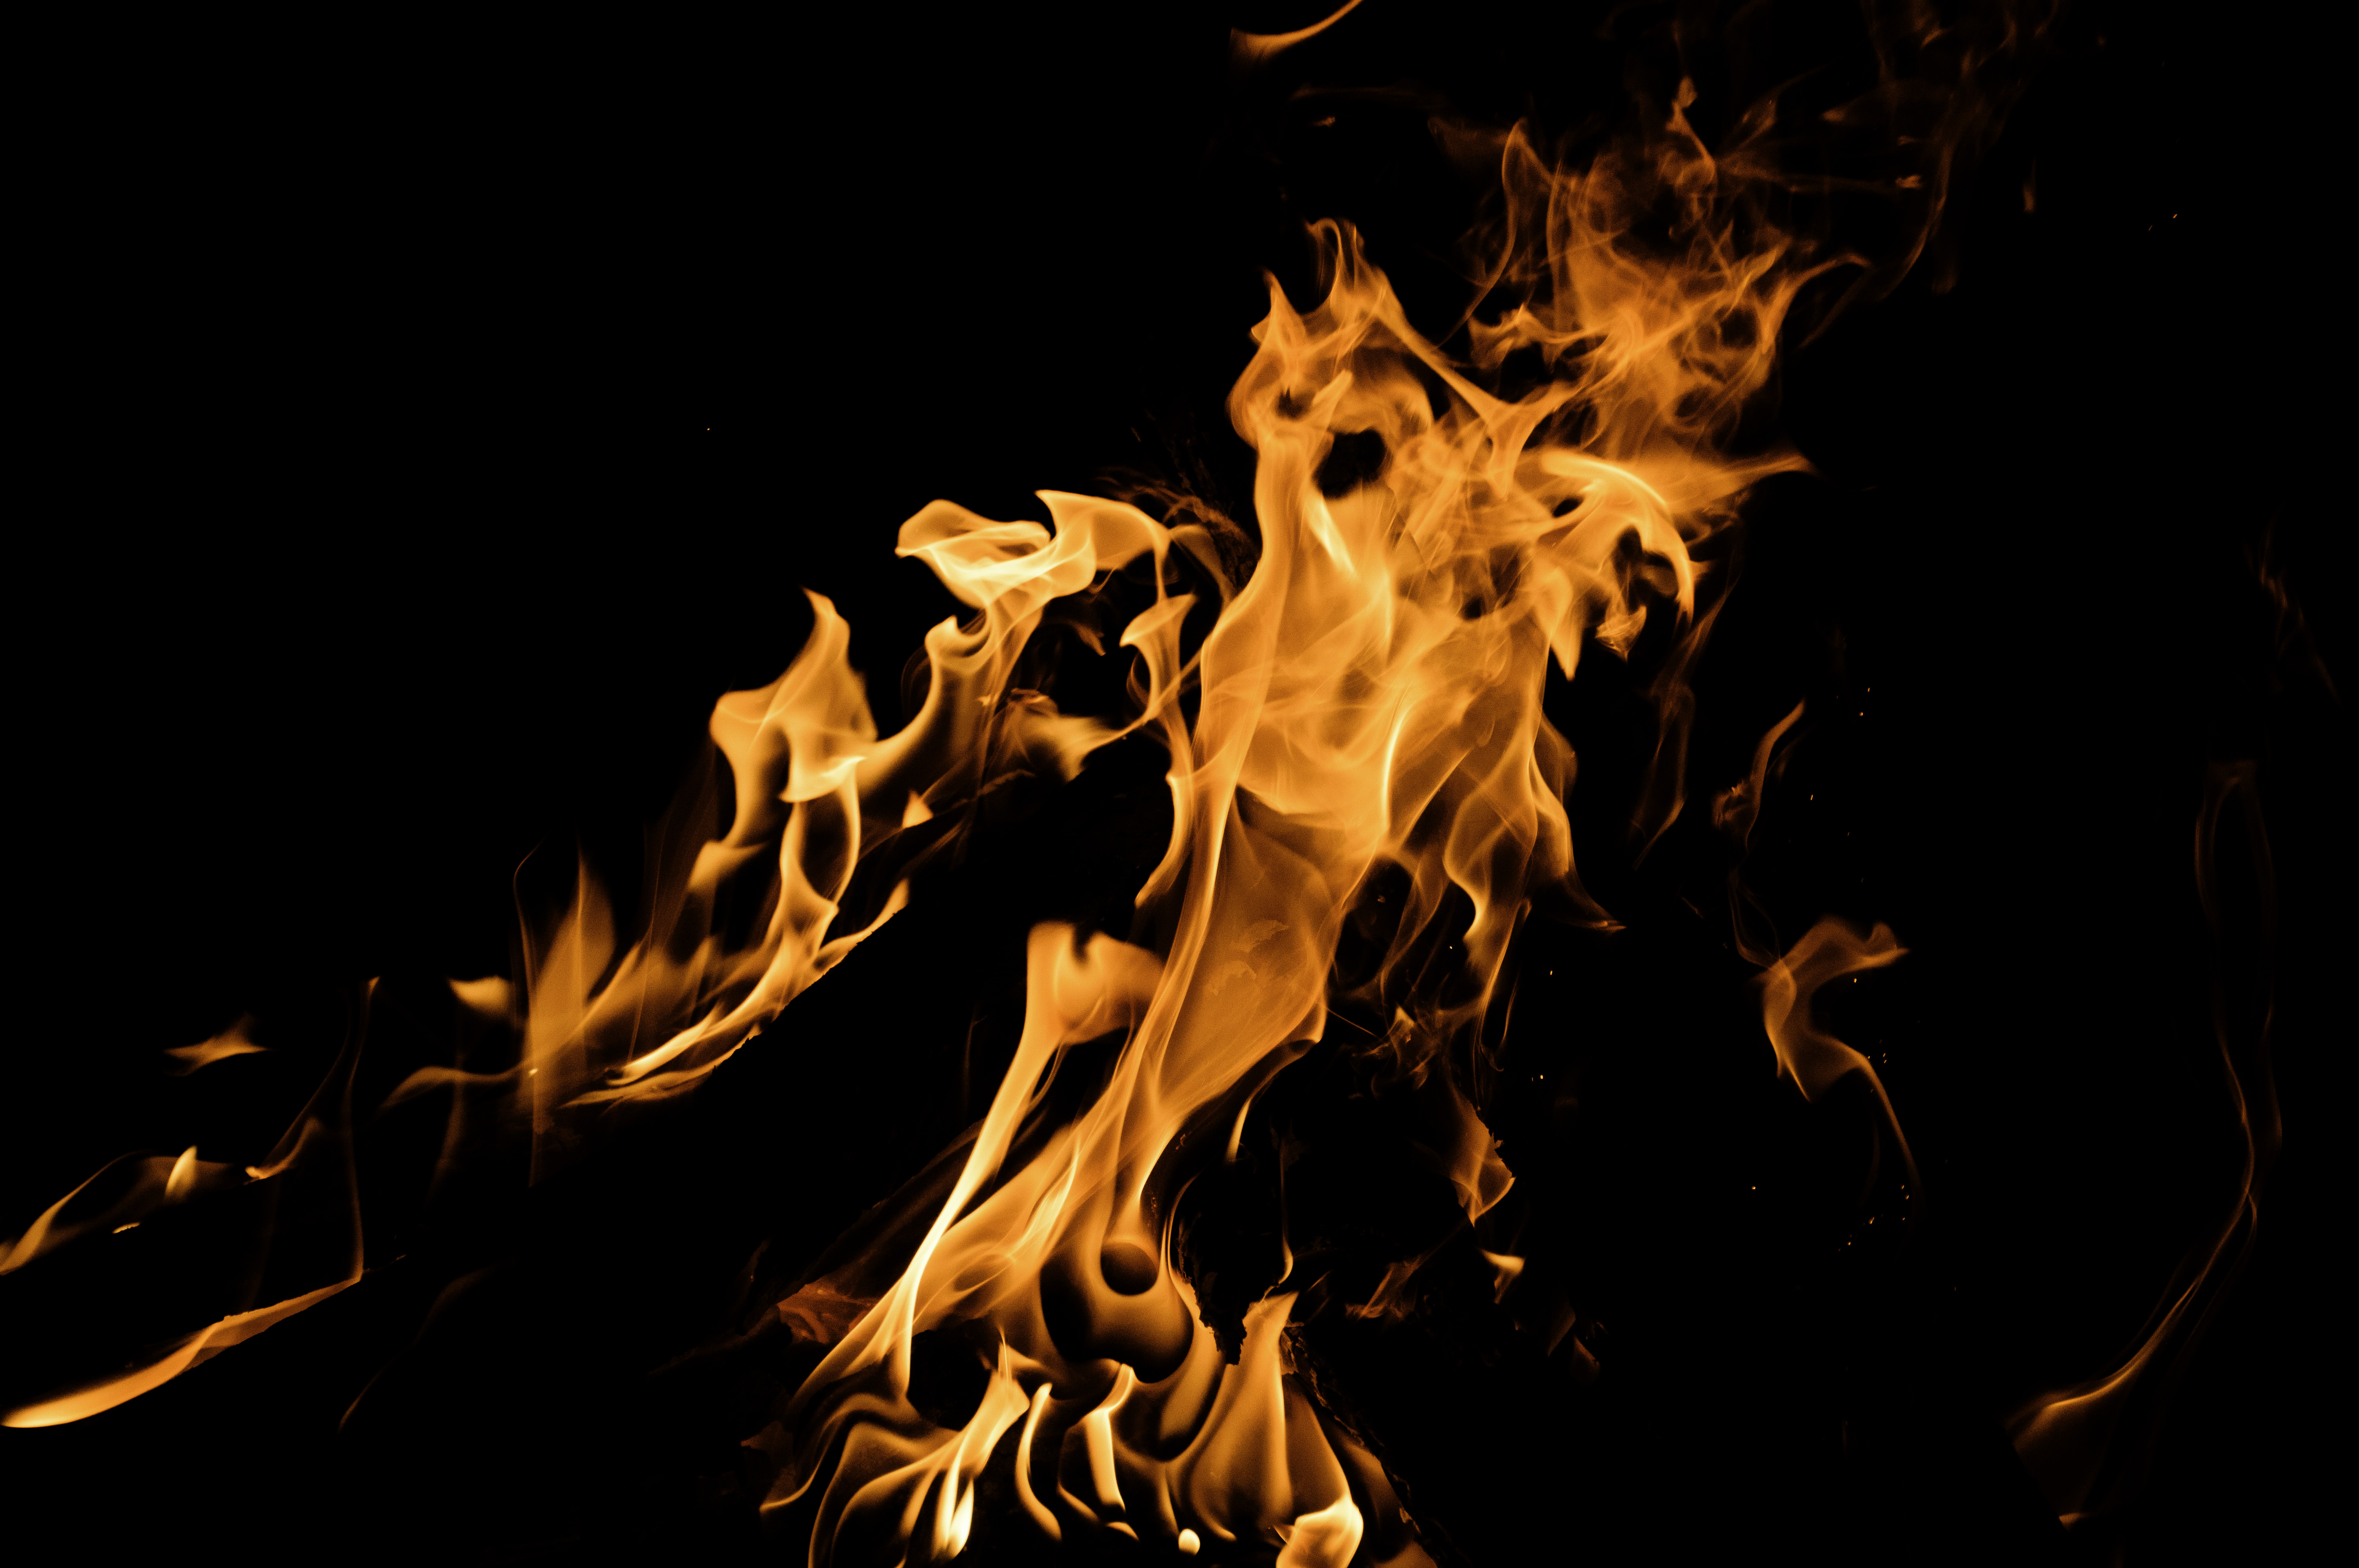 109269 download wallpaper fire, bonfire, night, black, dark, flame screensavers and pictures for free